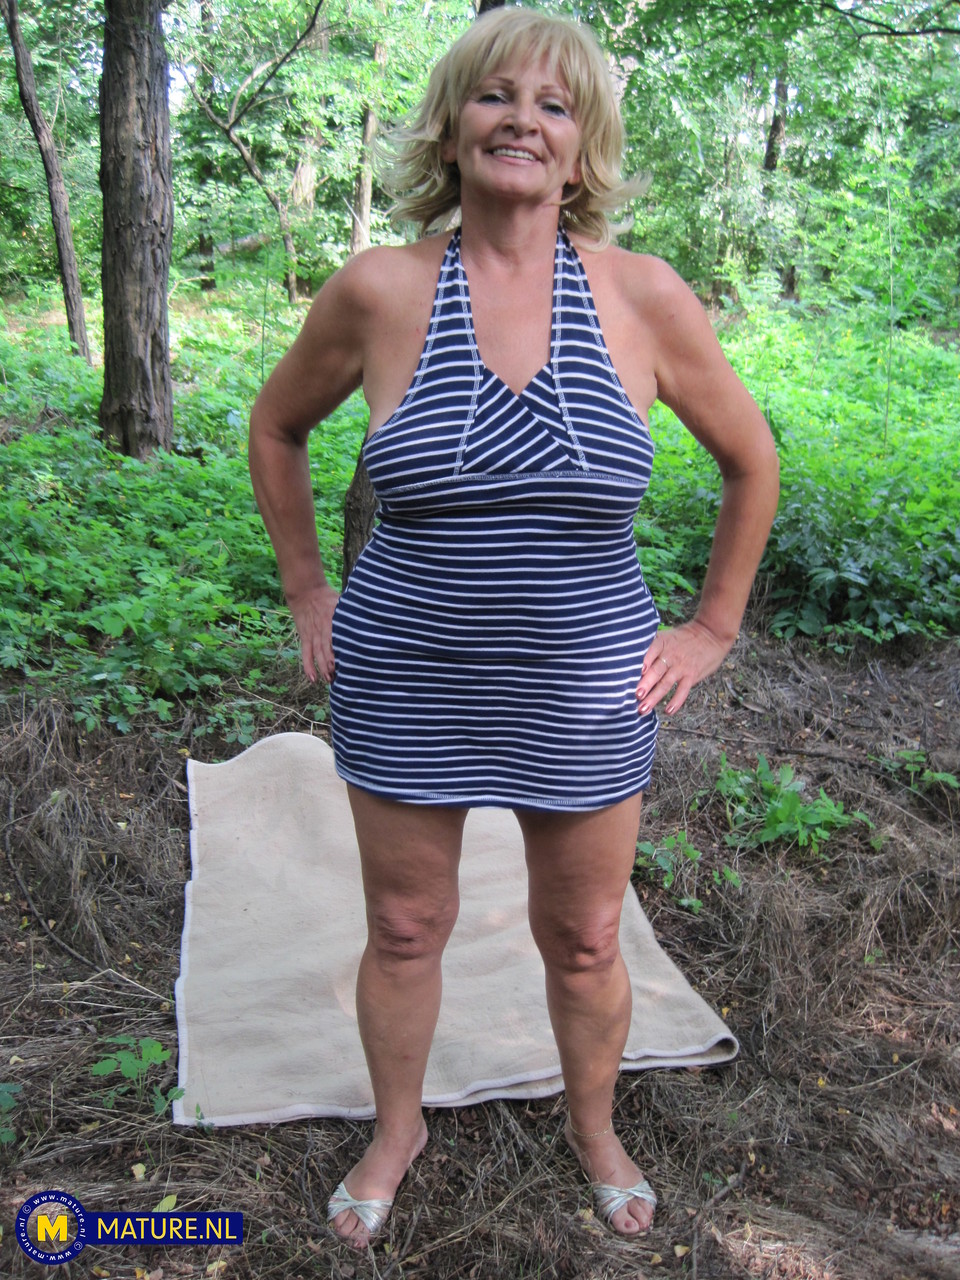 Mature Blonde Lady Sally G Has Pov Sex On A Blanket In The Woods